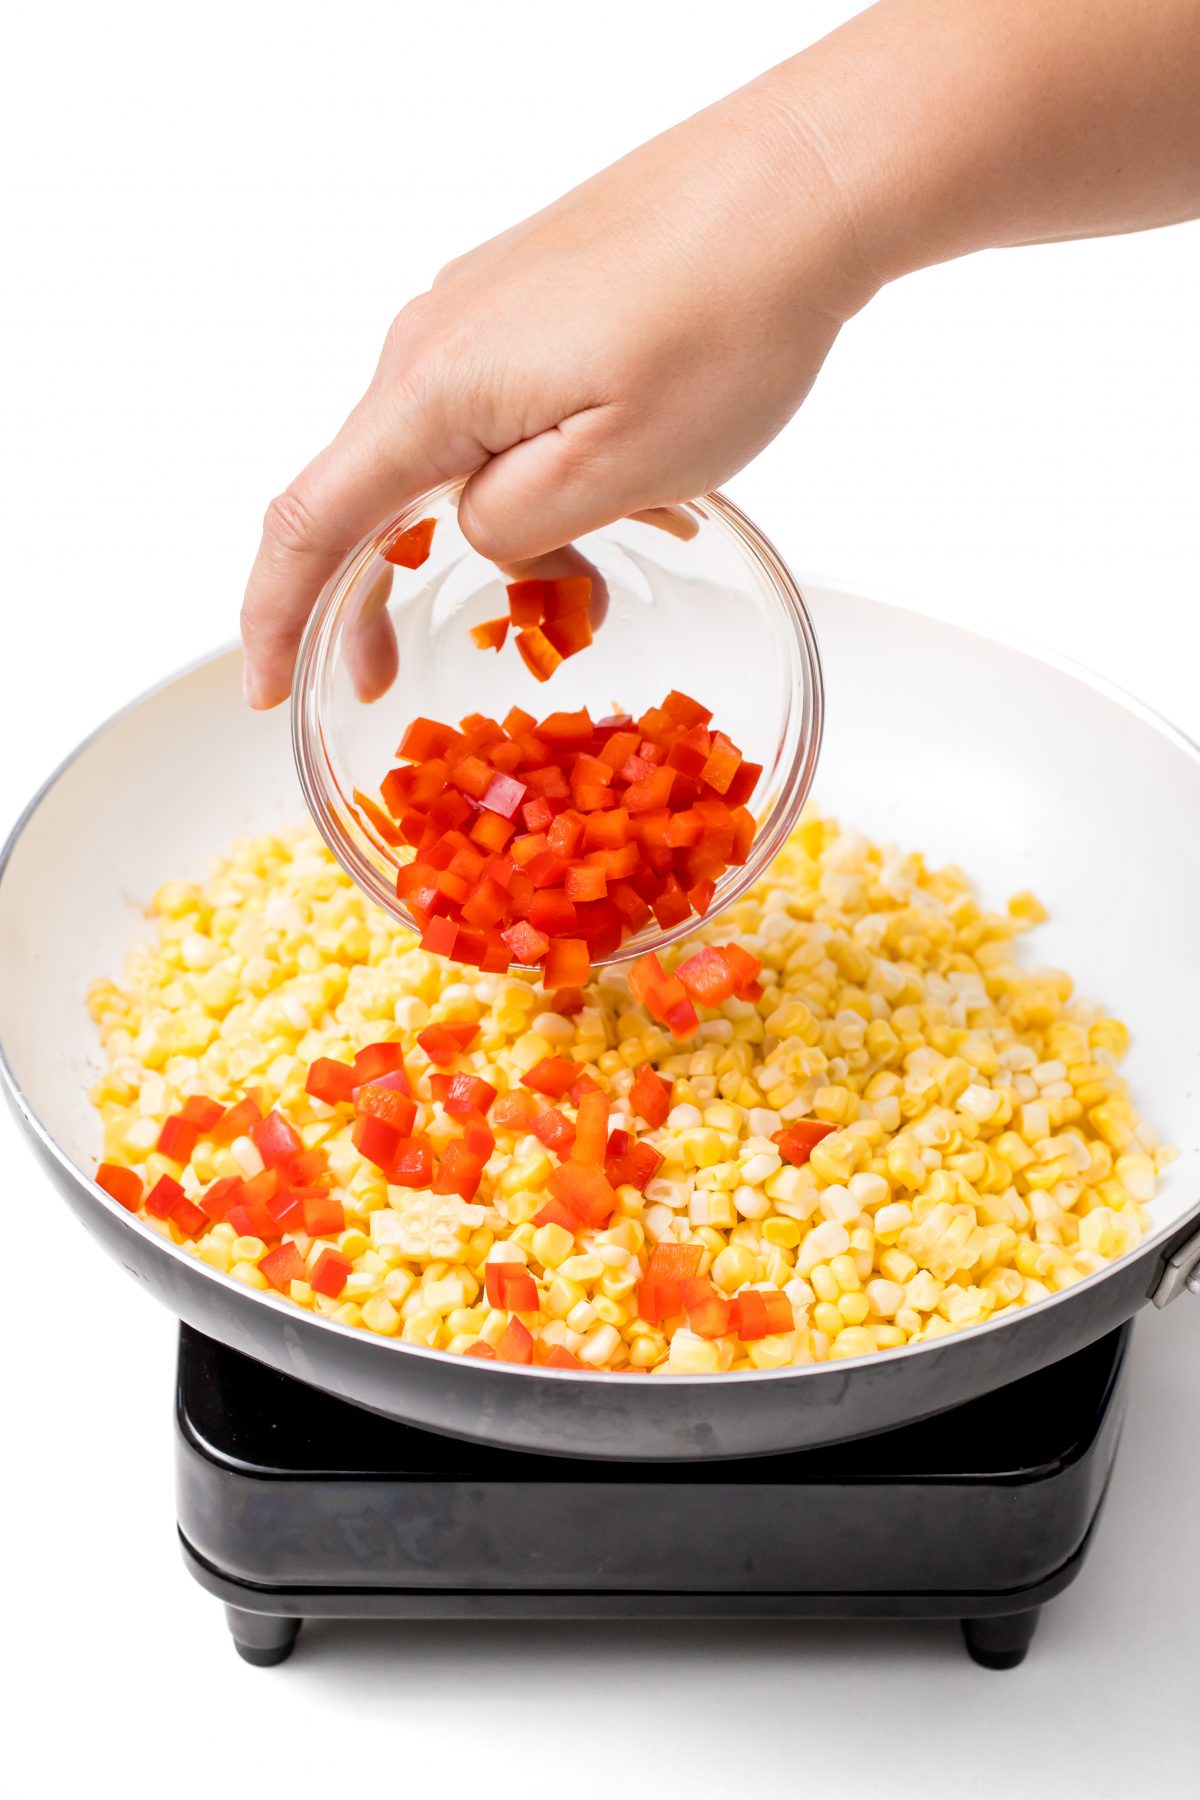 Sautee corn, and add red bell pepper